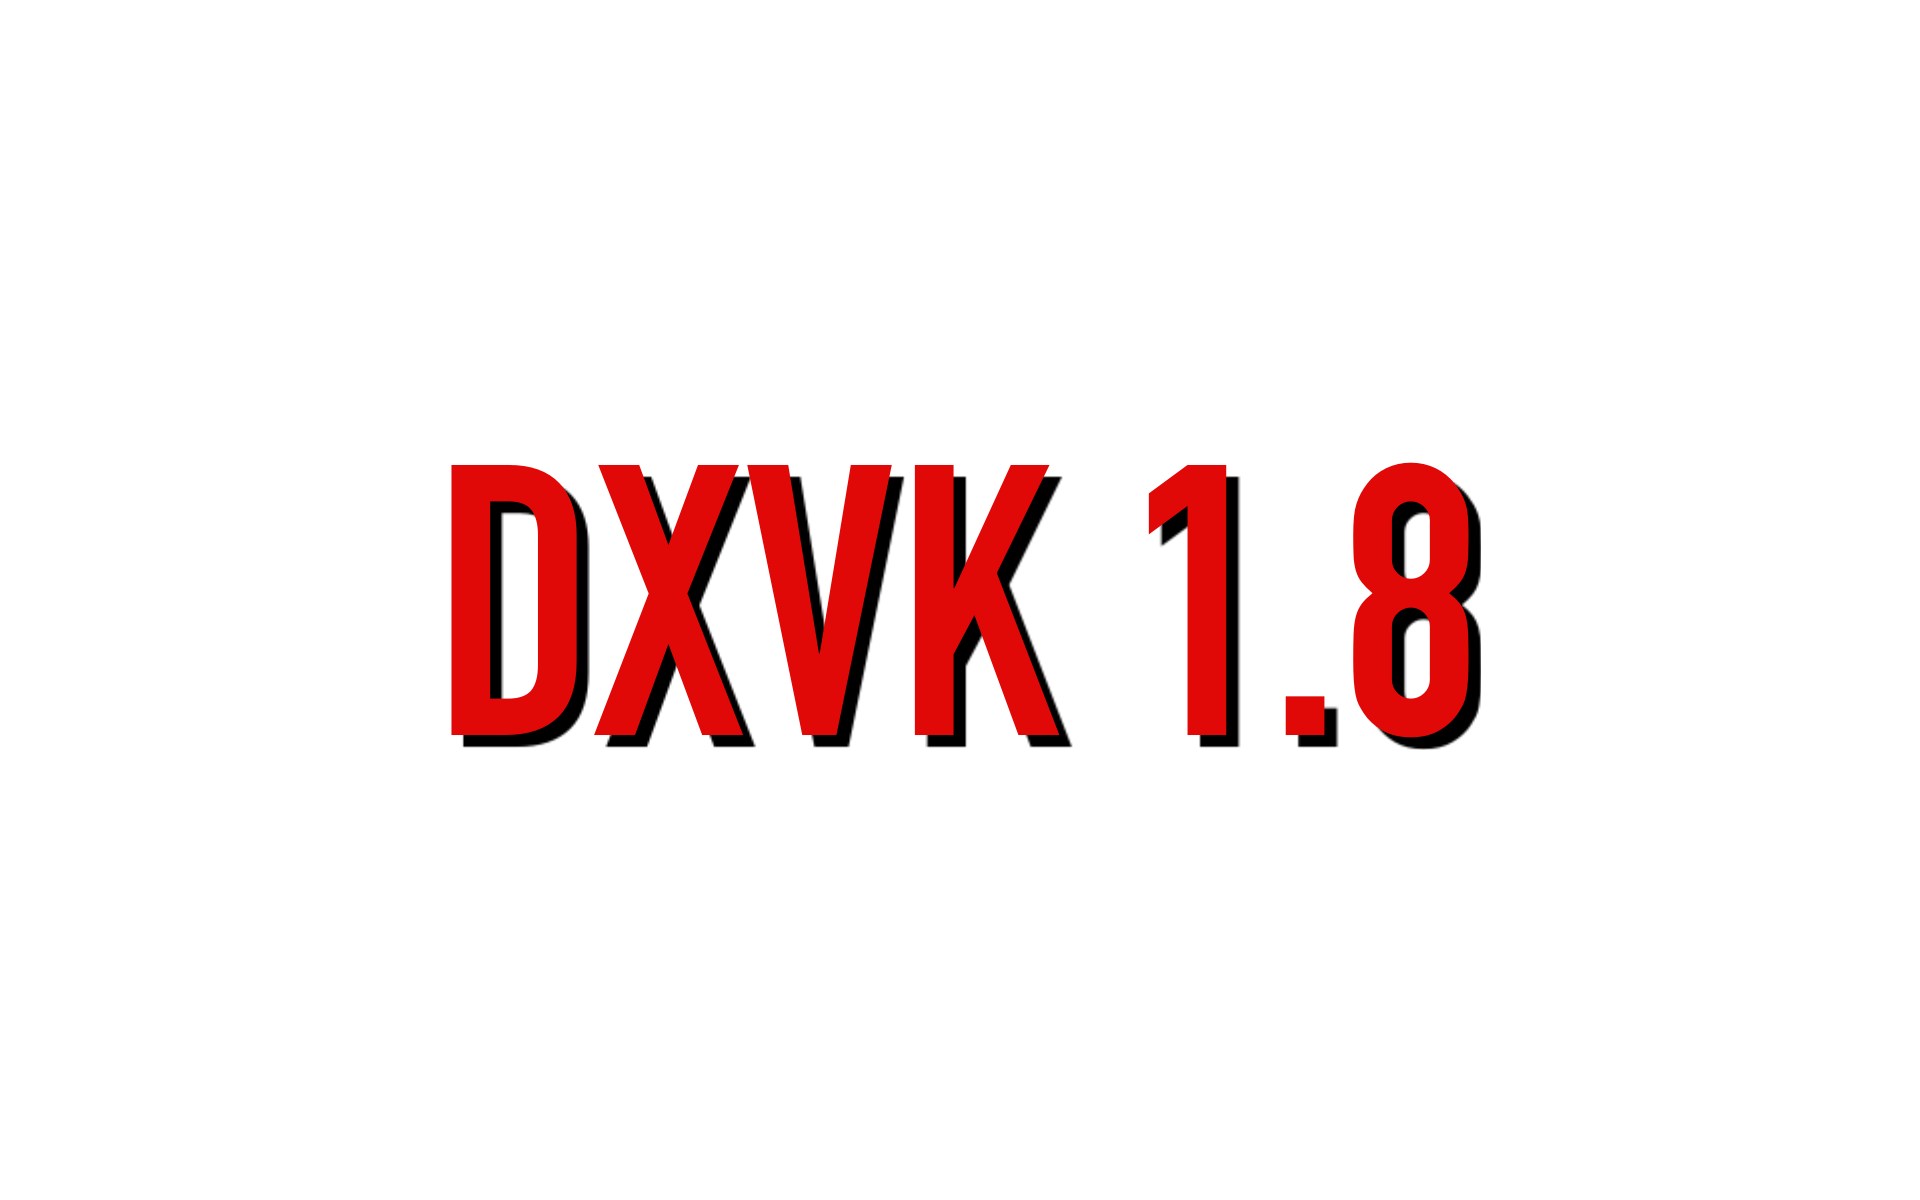 DXVK 1.8 Released with Improvements for Nioh 2, Hitman 3, and F1 2020